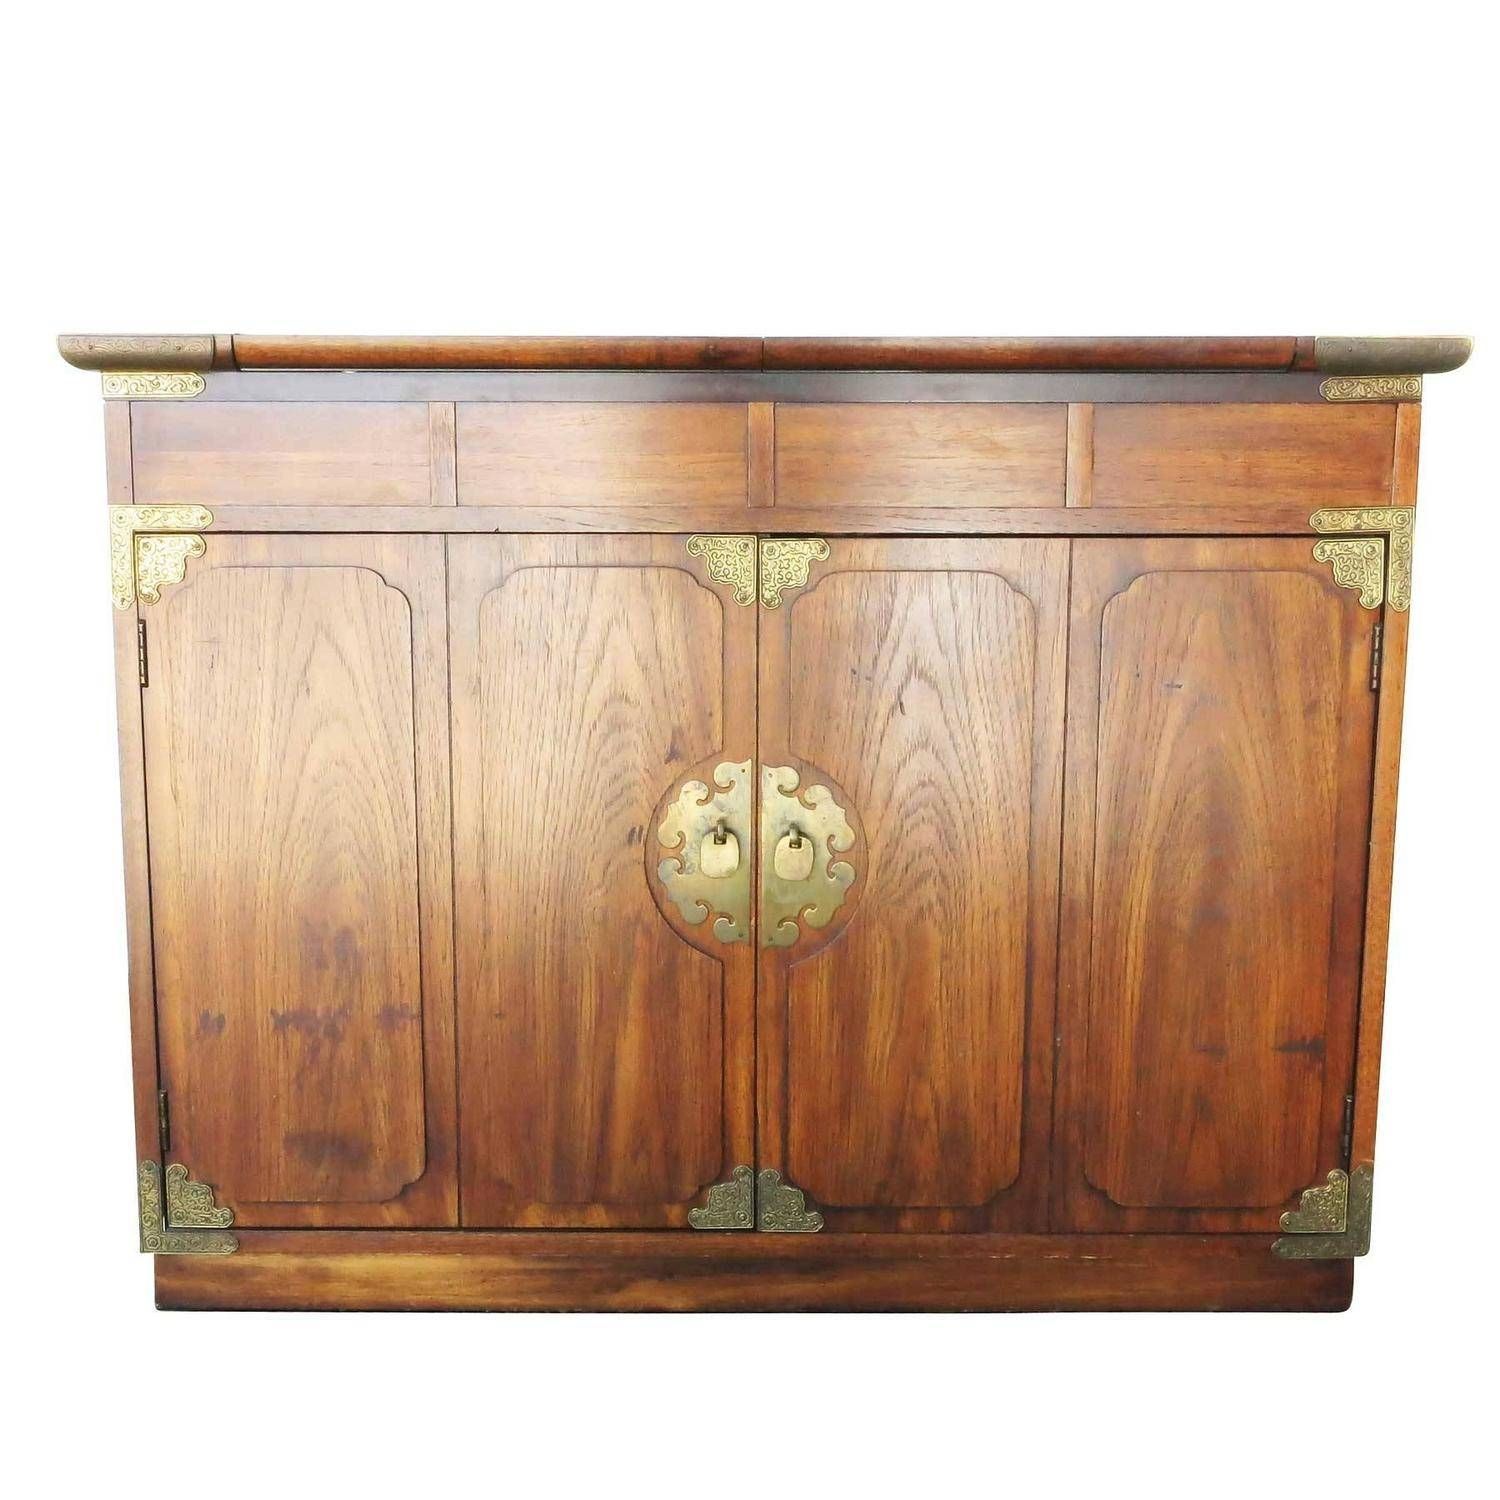 Asian Inspired Small Credenzathomasville For Huntley | Modernism Within Asian Sideboards (View 12 of 20)